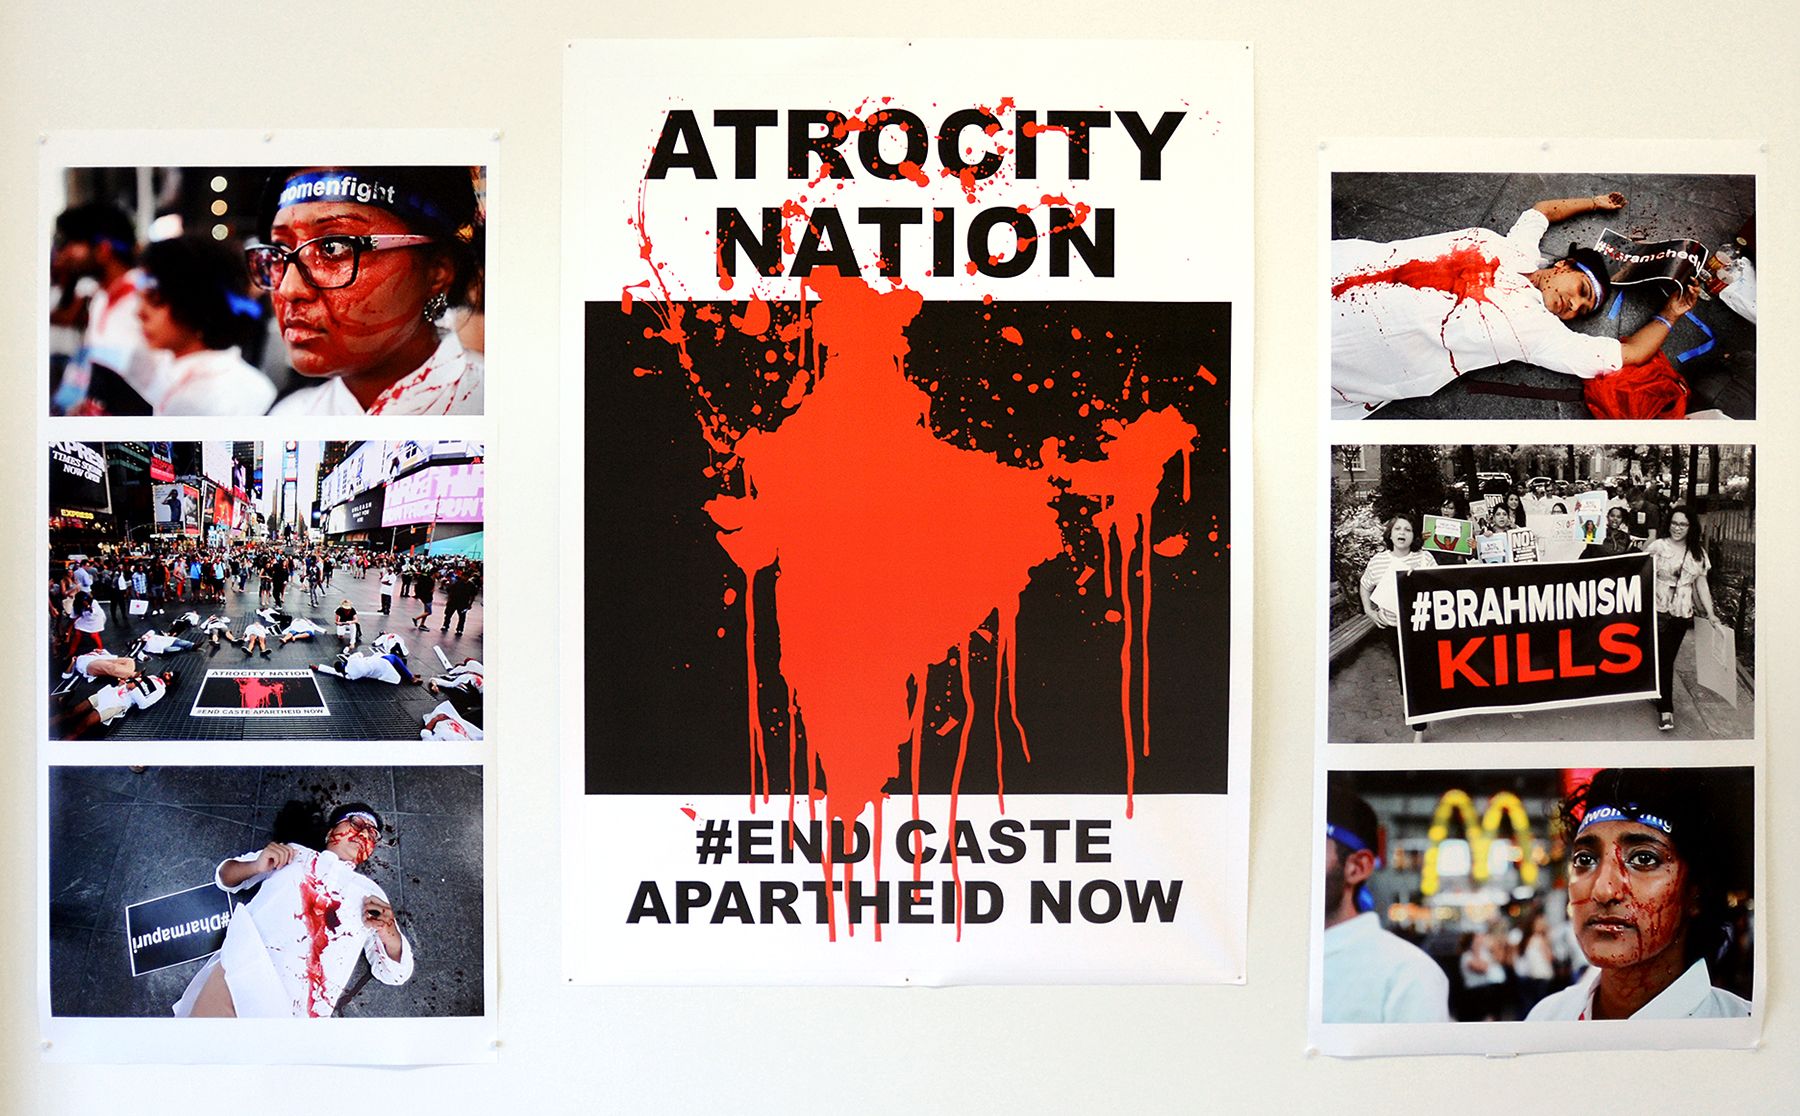 Atrocity Nation’s Equality Labs banner with pictures and text “End Caste Apartheid Now”.